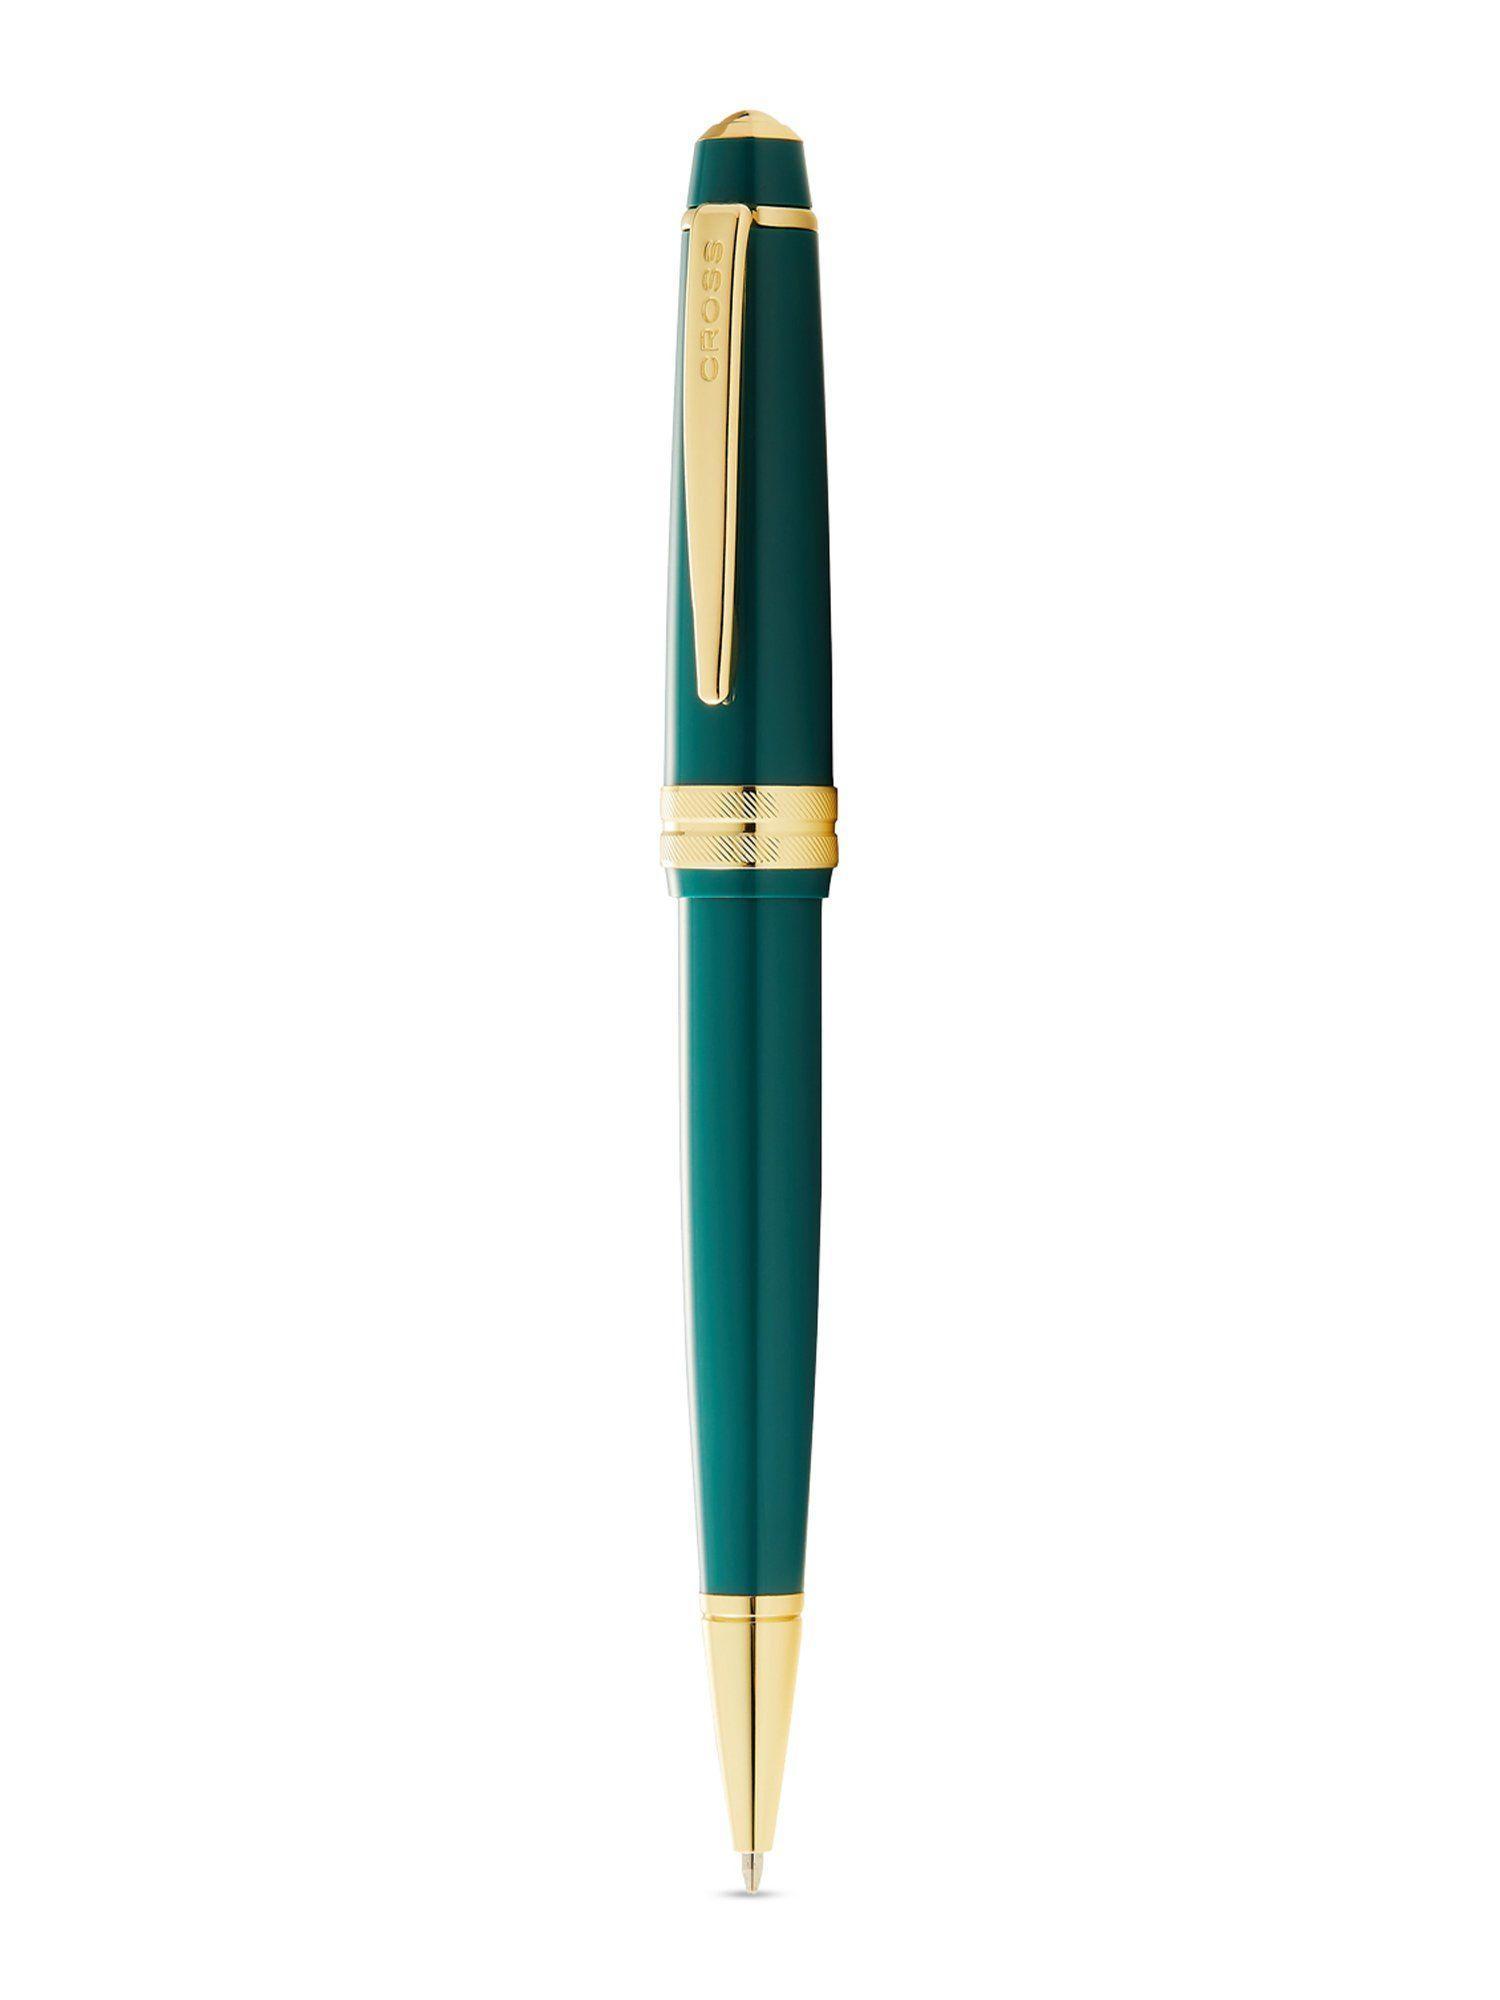 at0742-12 bailey light green resin ballpoint pen with gold plate app